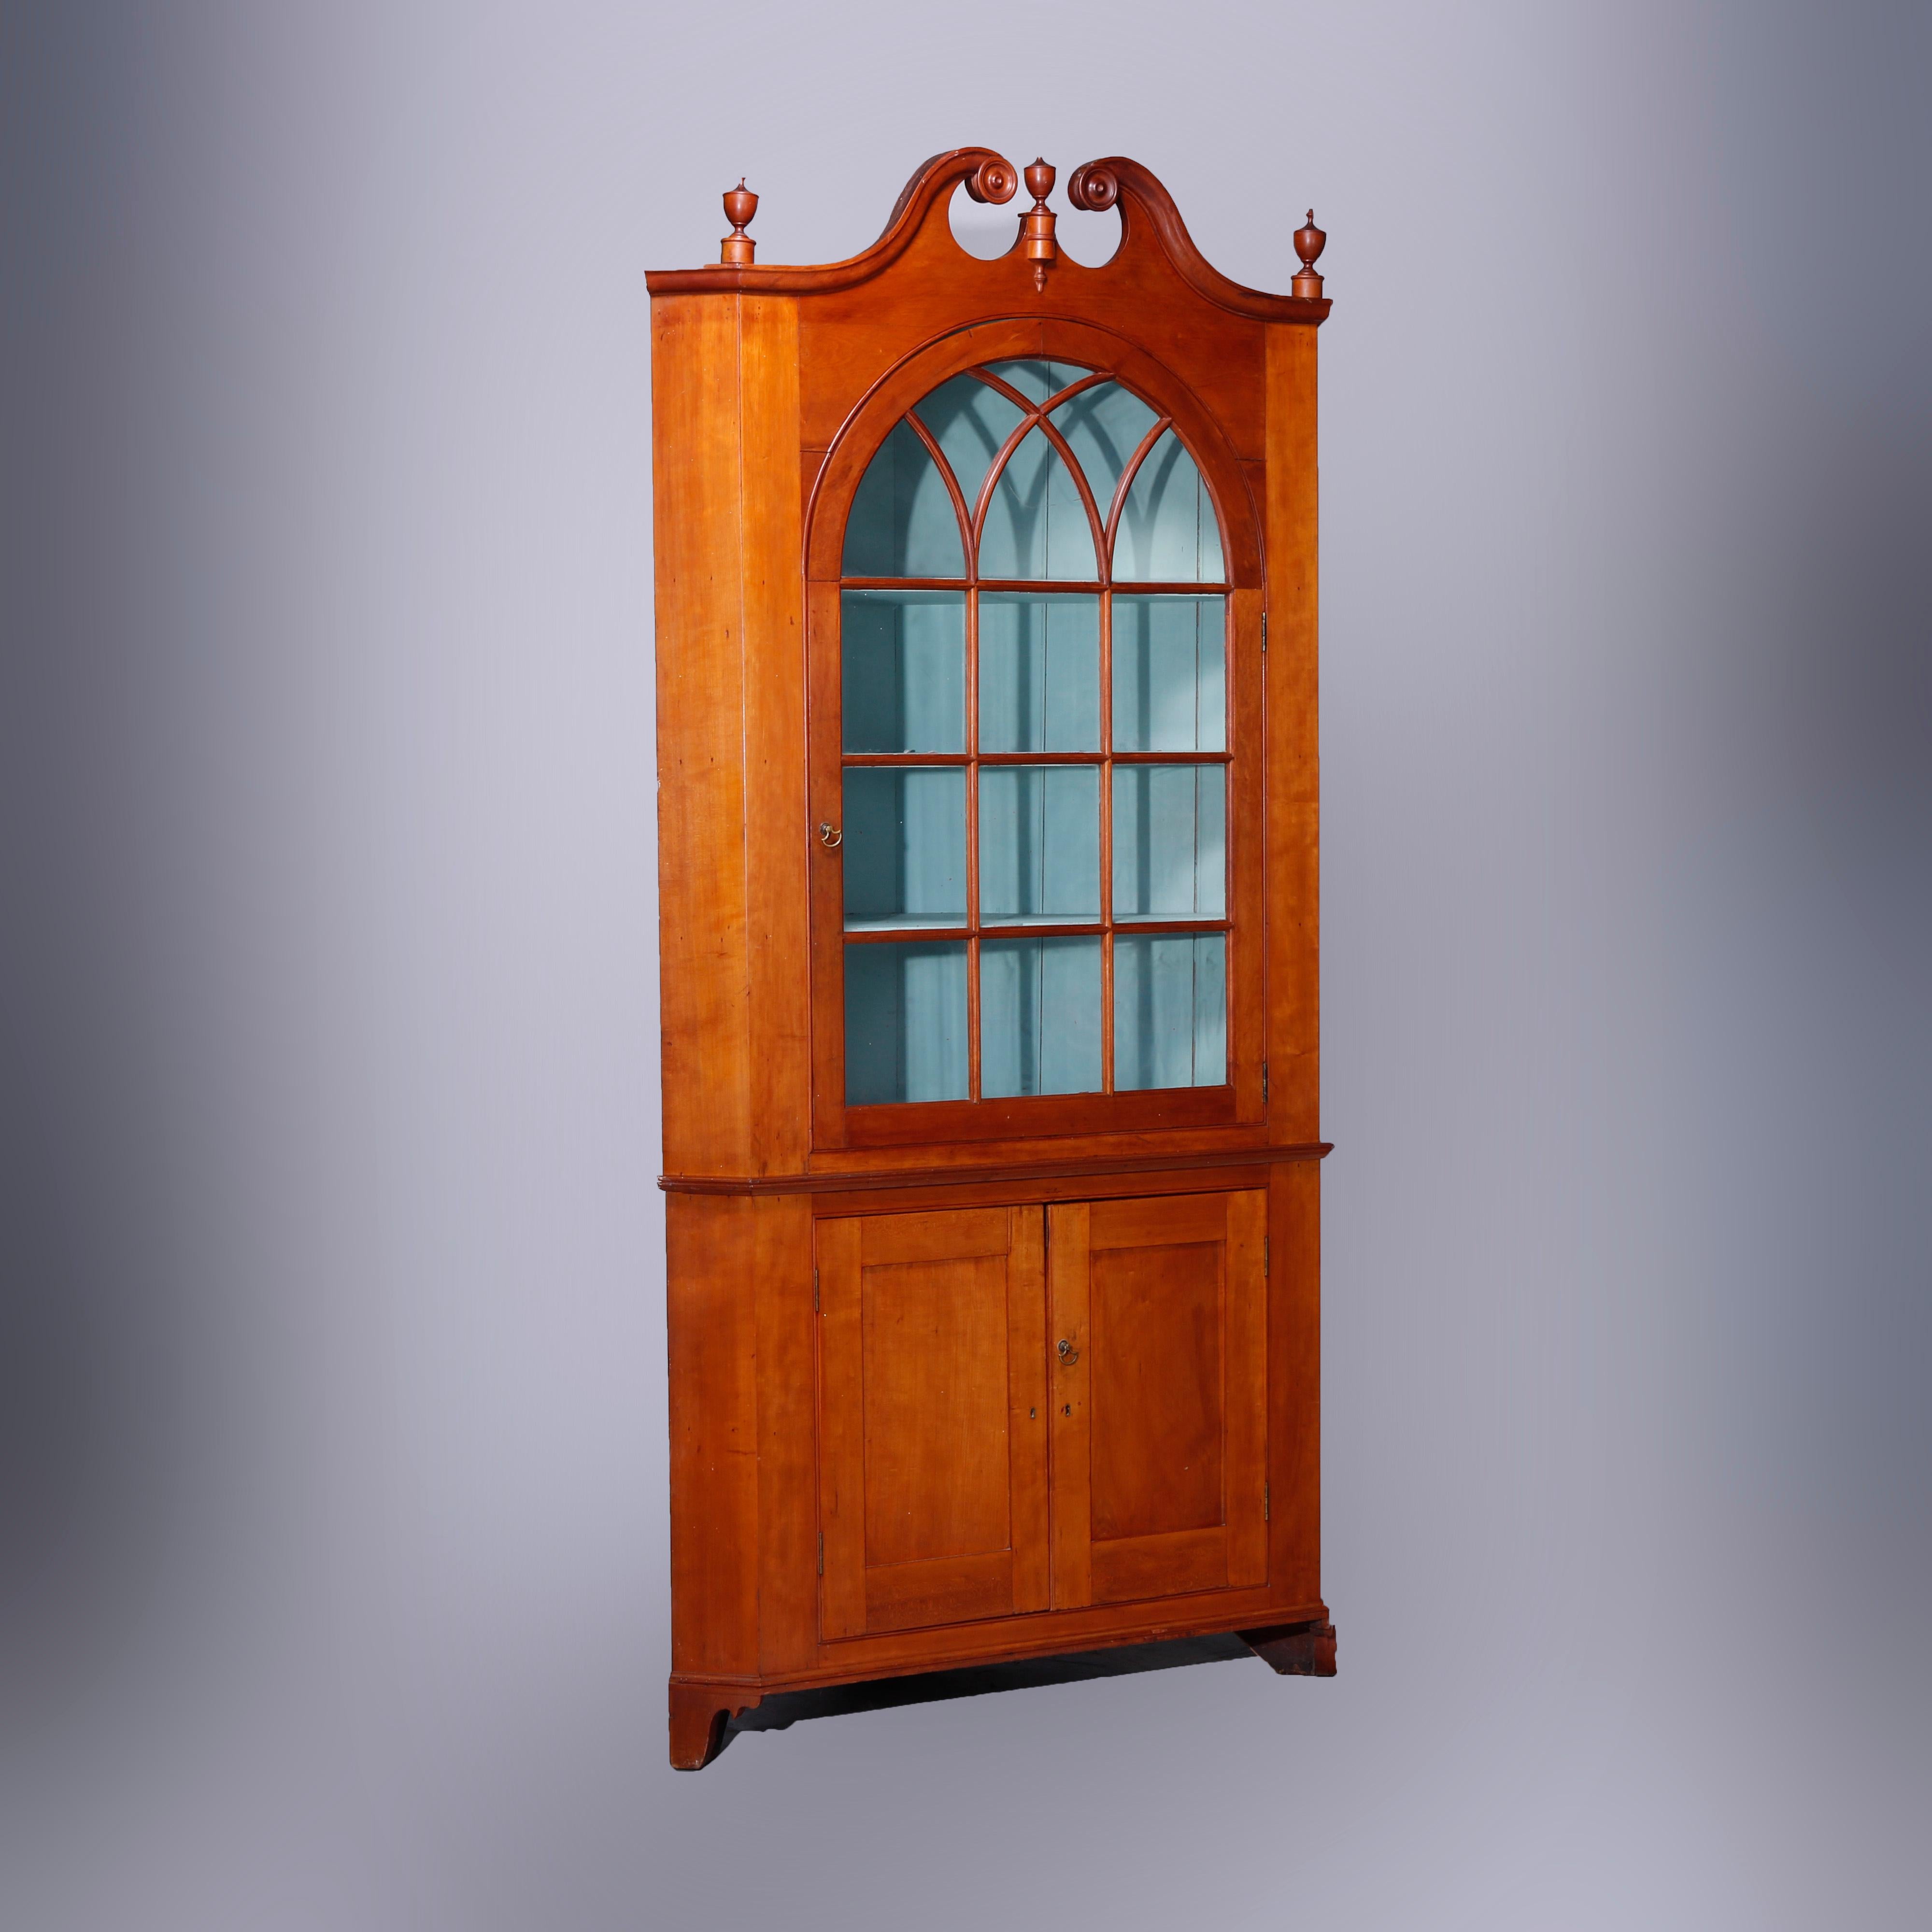 An antique Pennsylvania Federal two-piece corner cupboard offers cherry construction with broken arch crest having central finial surmounting cabinet with upper having single door with arched mullioned glass window and opening to shelved interior